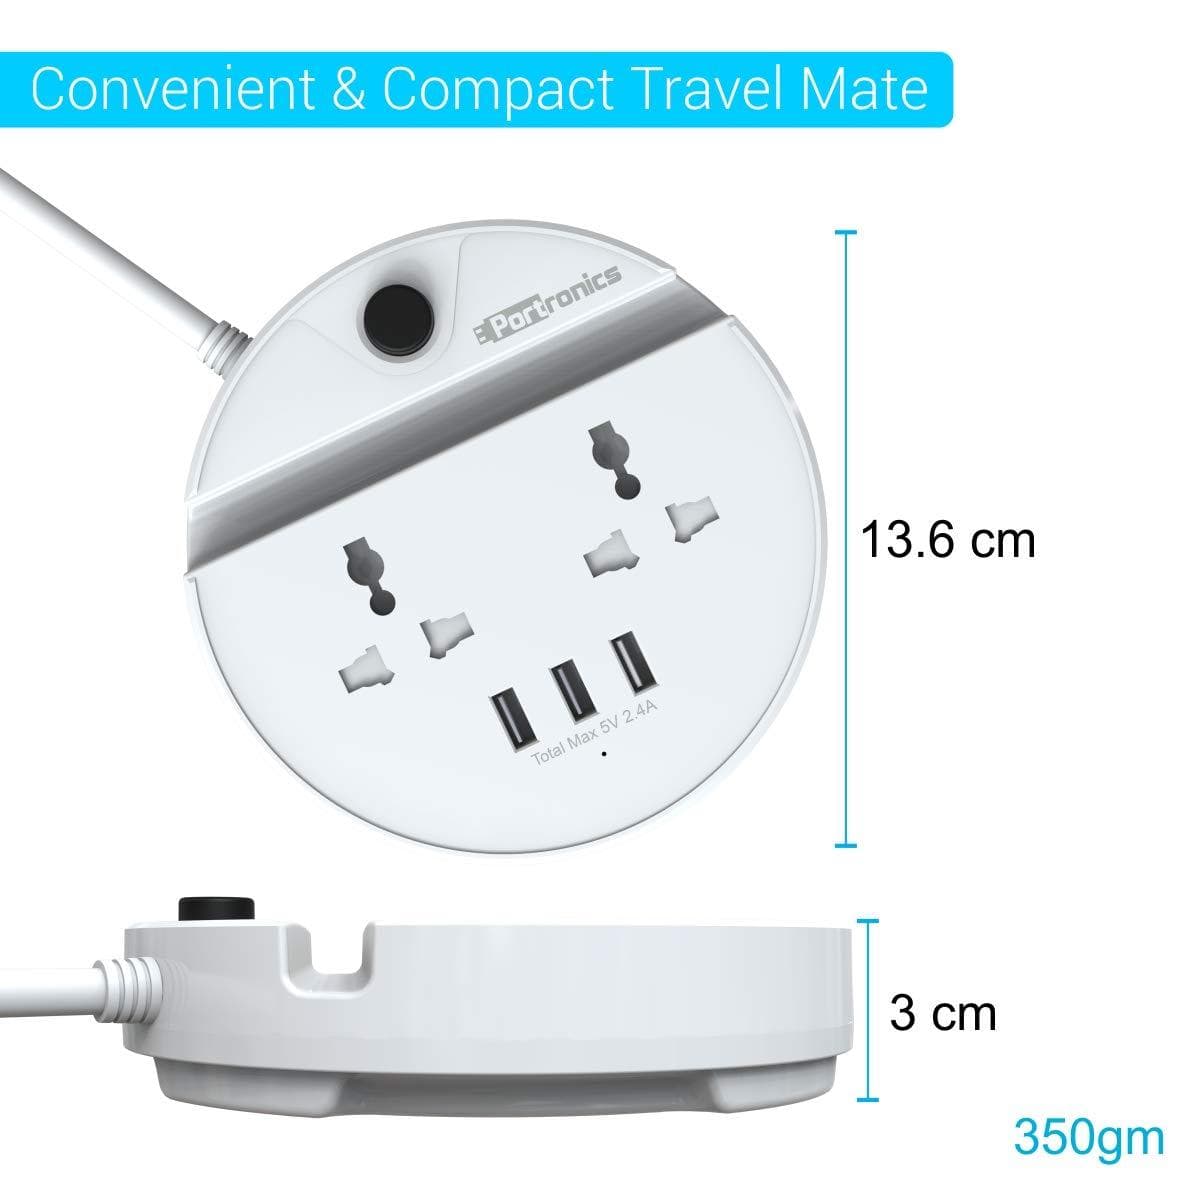 Portronics Power BUN, a Surge Protector with 2 AC Outlets and 3 USB Charging Ports Plus a Phone Docking Station, 1.5 Meter Power Cord, LED Indicator, White-Charger Pad-dealsplant